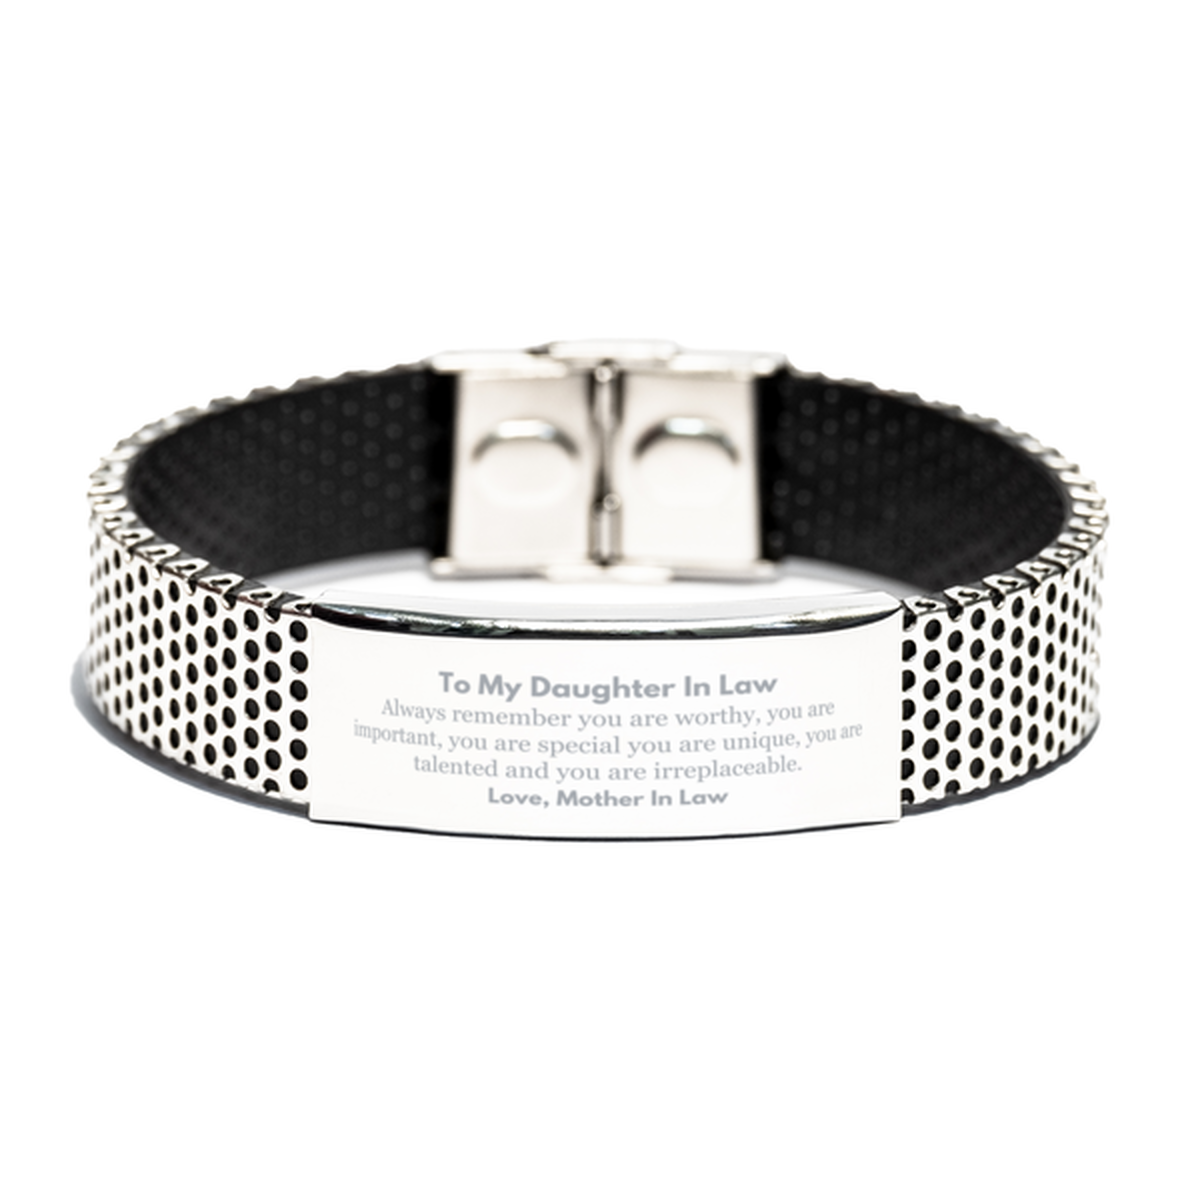 Daughter In Law Birthday Gifts from Mother In Law, Inspirational Stainless Steel Bracelet for Daughter In Law Christmas Graduation Gifts for Daughter In Law Always remember you are worthy, you are important. Love, Mother In Law